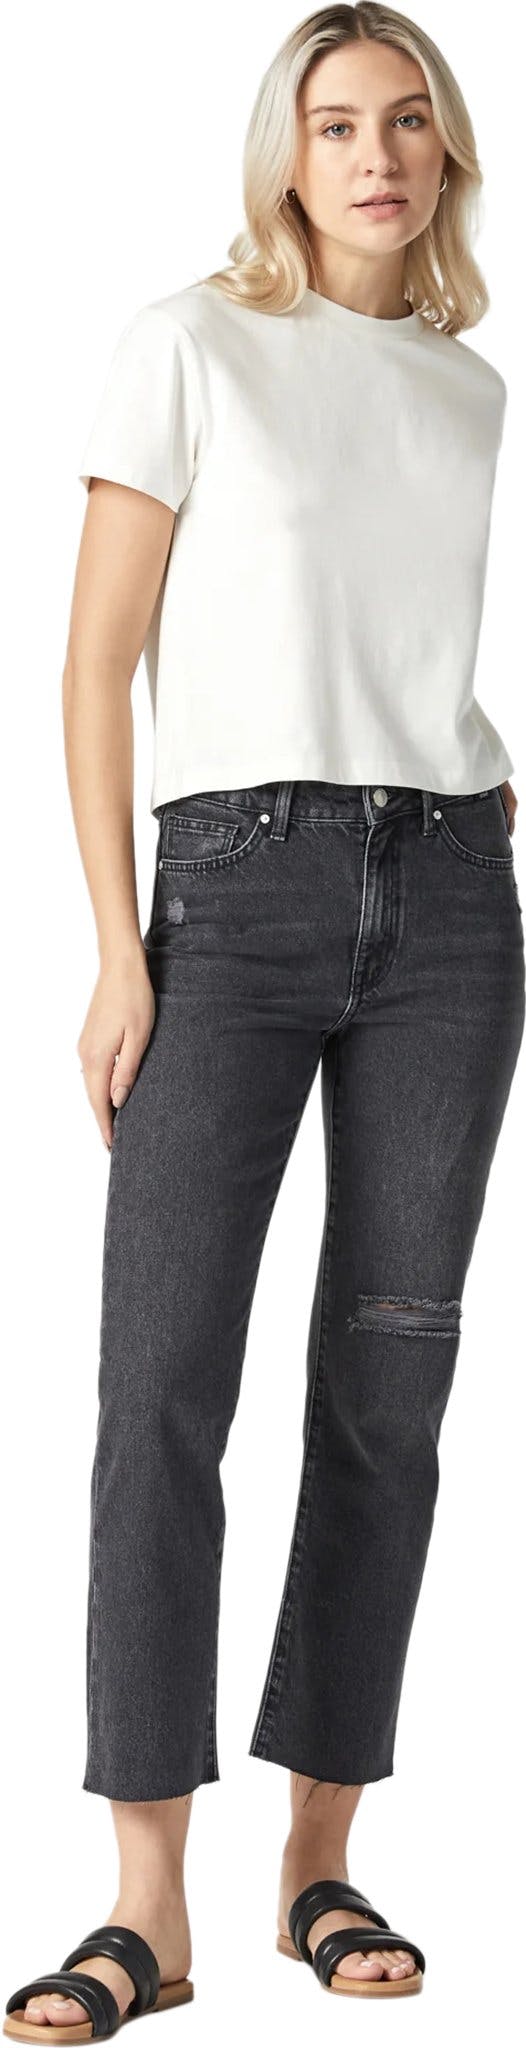 Product image for New York Straight Leg Jeans - Women's